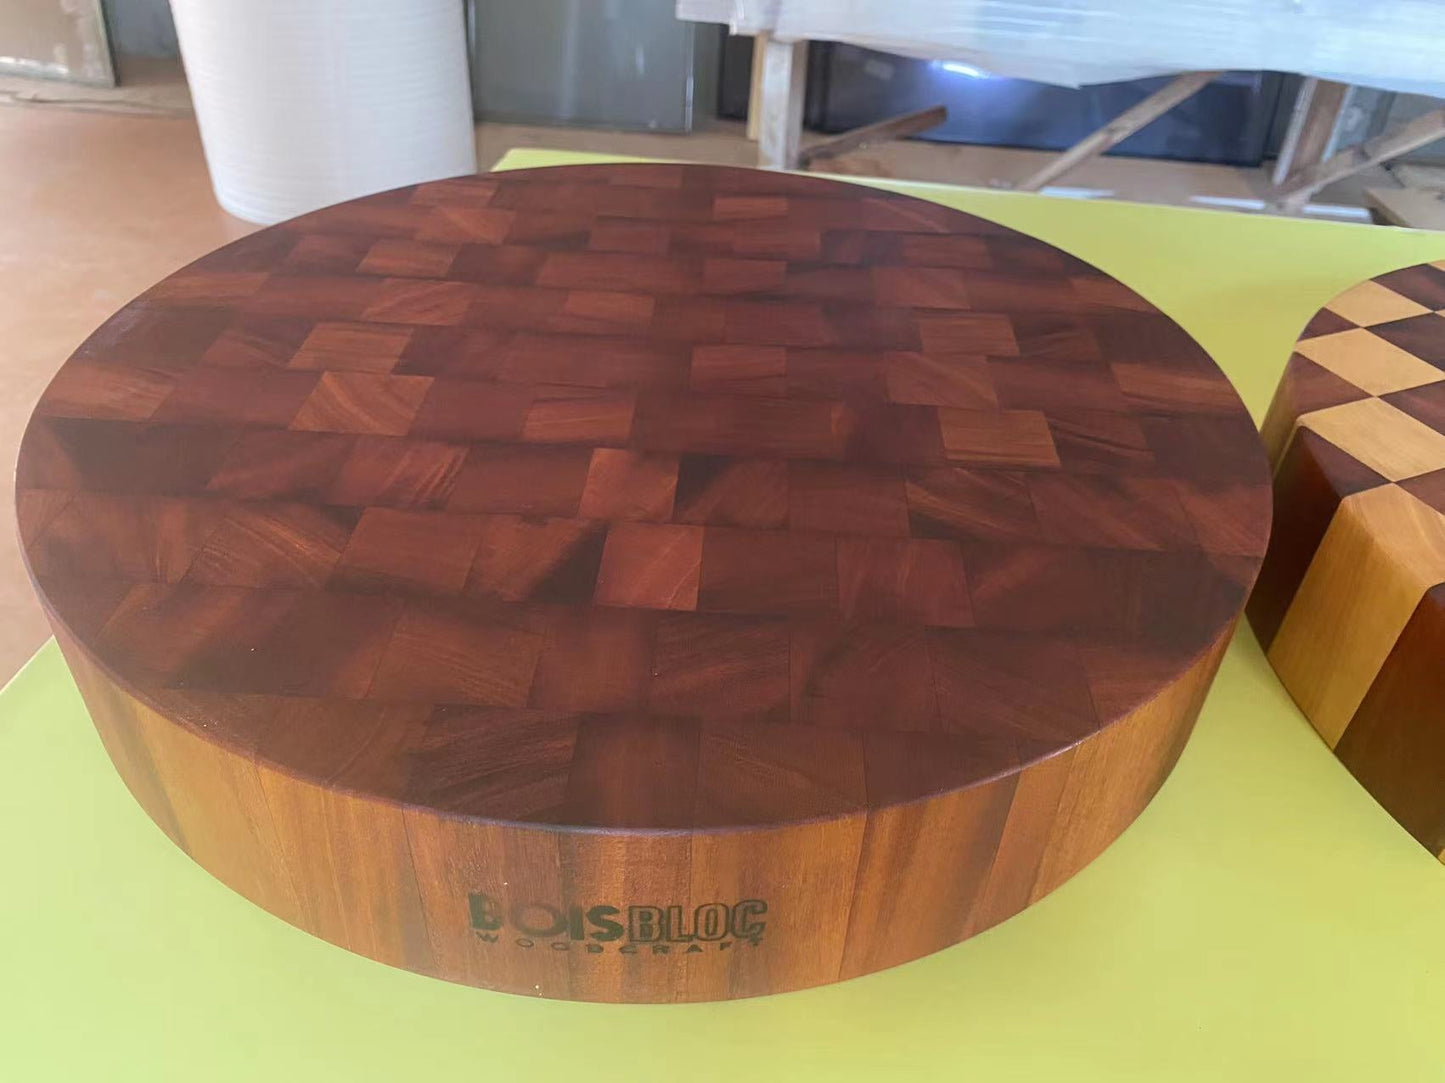 End Grain - Reversible Round 18"L x 18"W x 3"T Cutting/Carving/Chopping/Serving Board